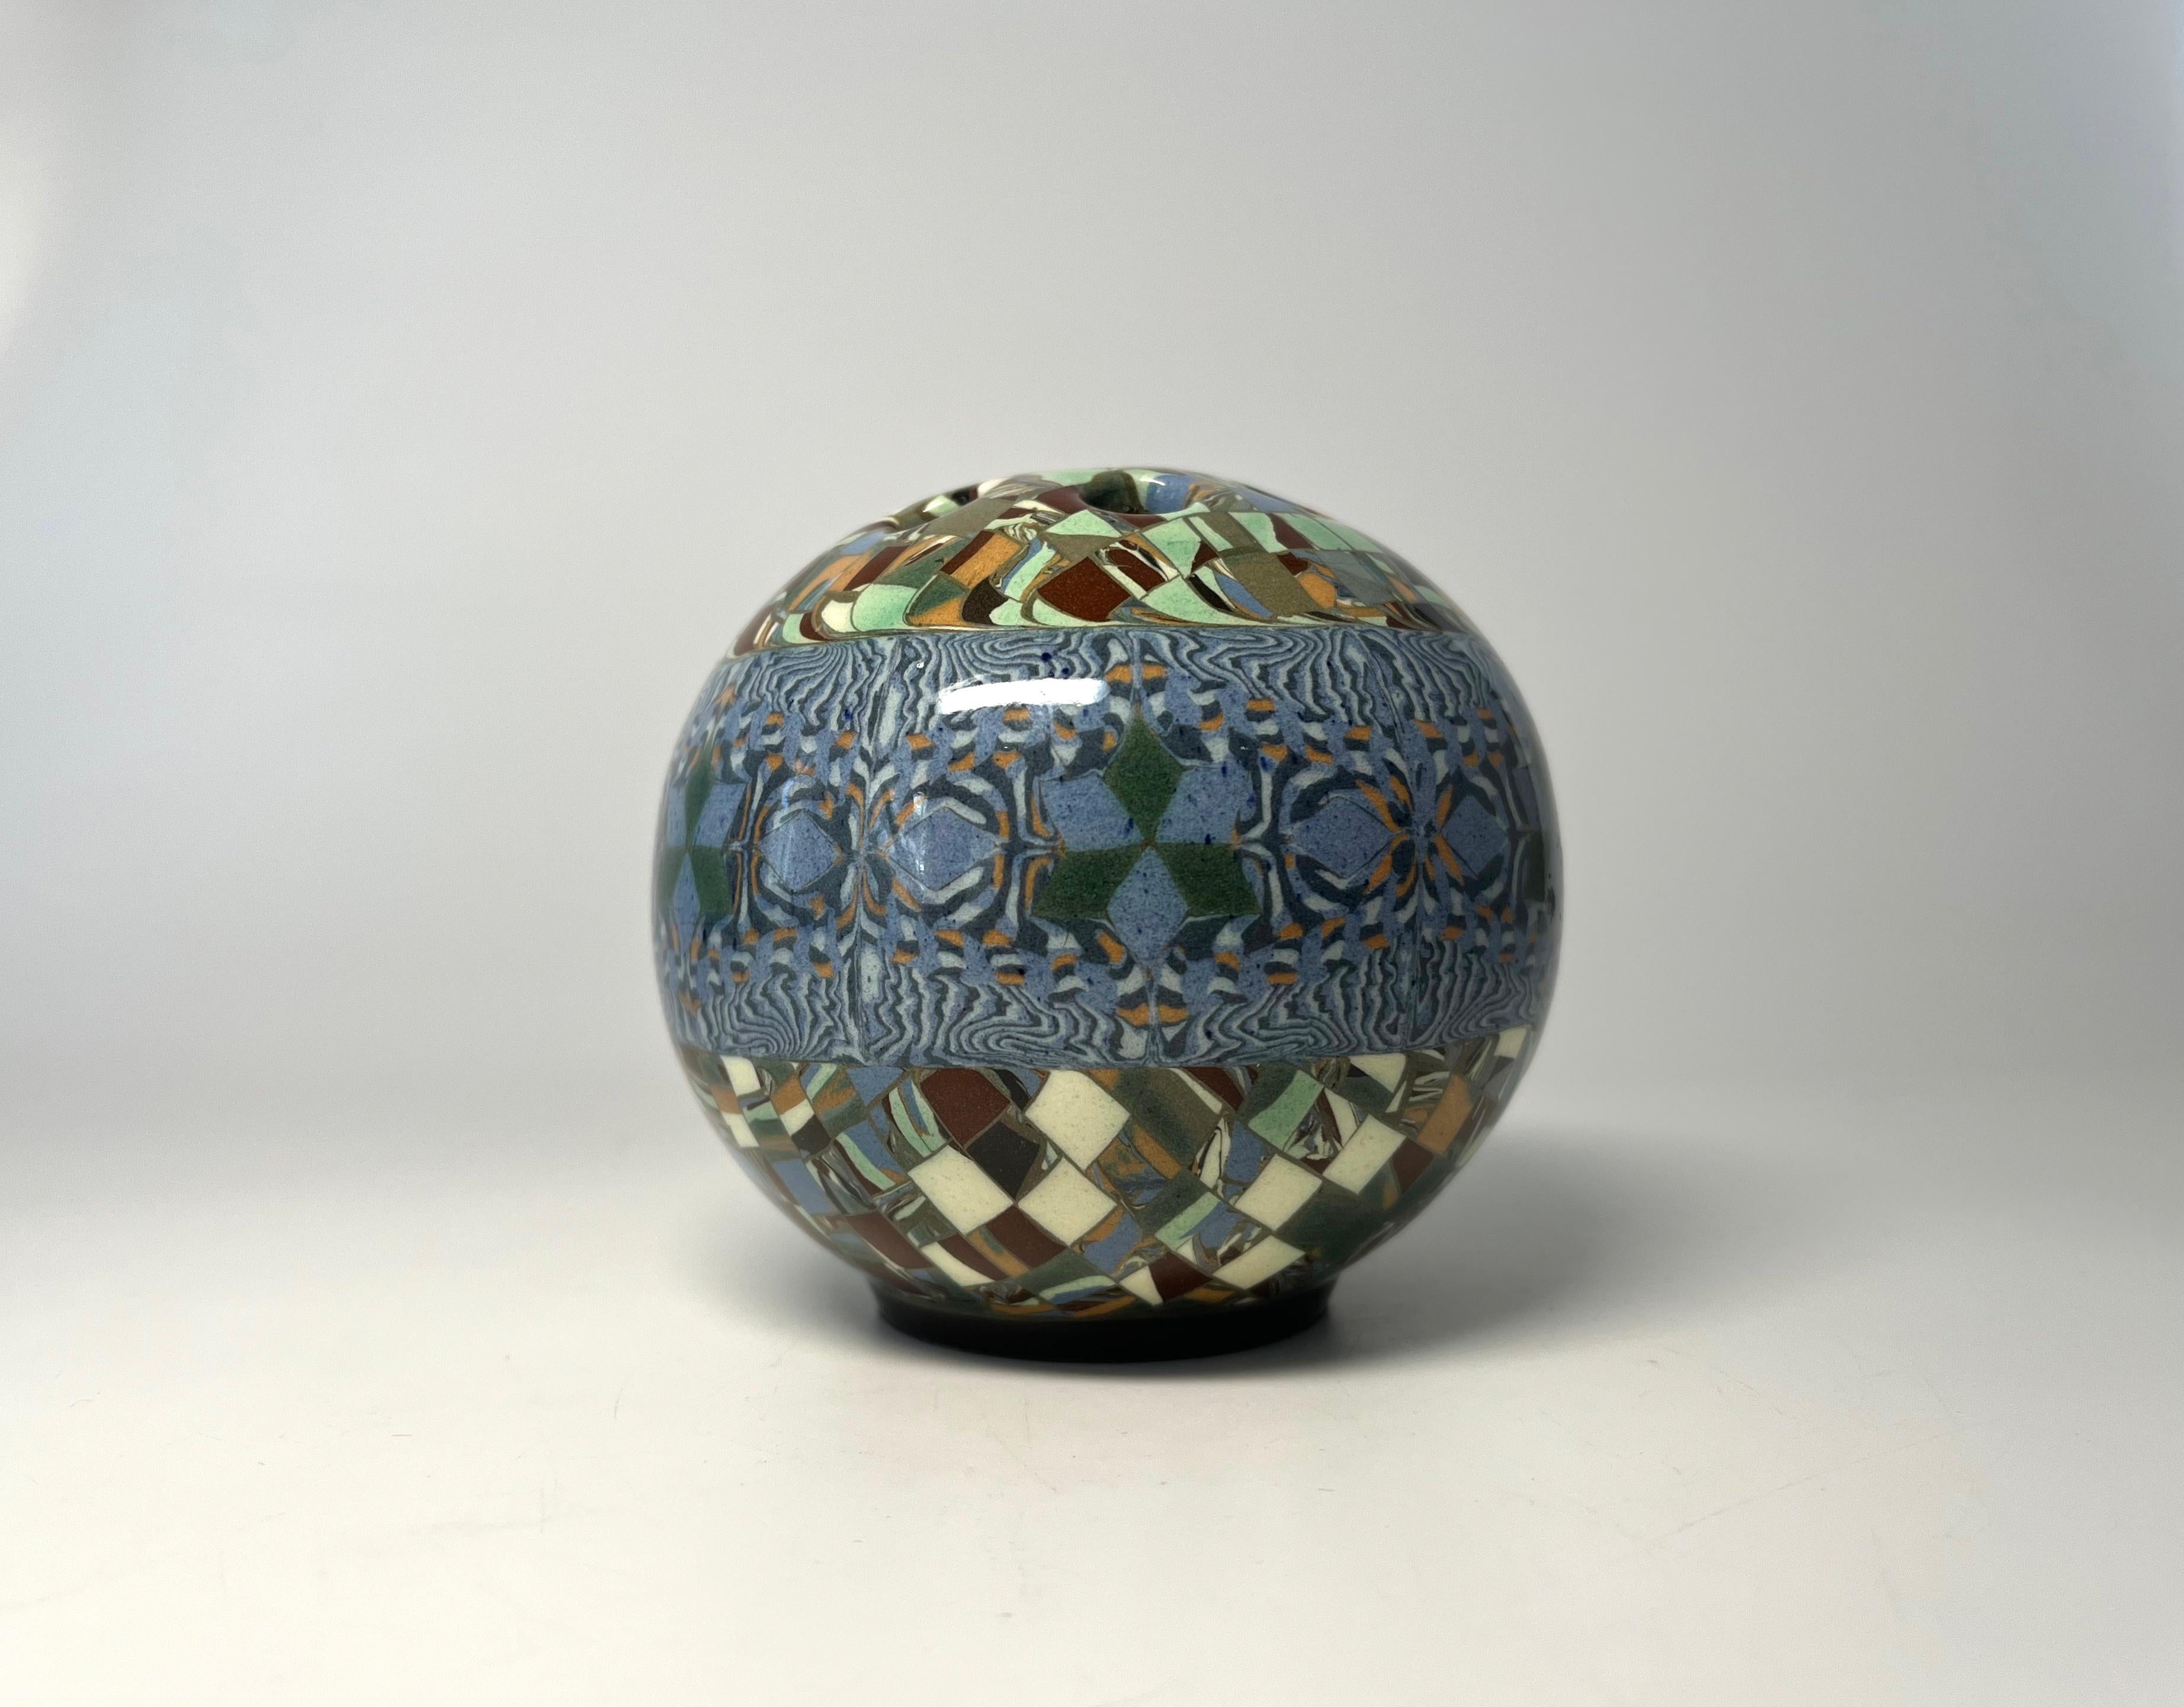 Petit diamond motif Jean Gerbino for Vallauris, France, ceramic glazed mosaic posy potpourri vase 
Wonderful patterns and colouring from Gerbino
Circa 1960's
Signed Gerbino  to base
Height 3.25 inch, Diameter 3.25 inch, 
In very good condition.